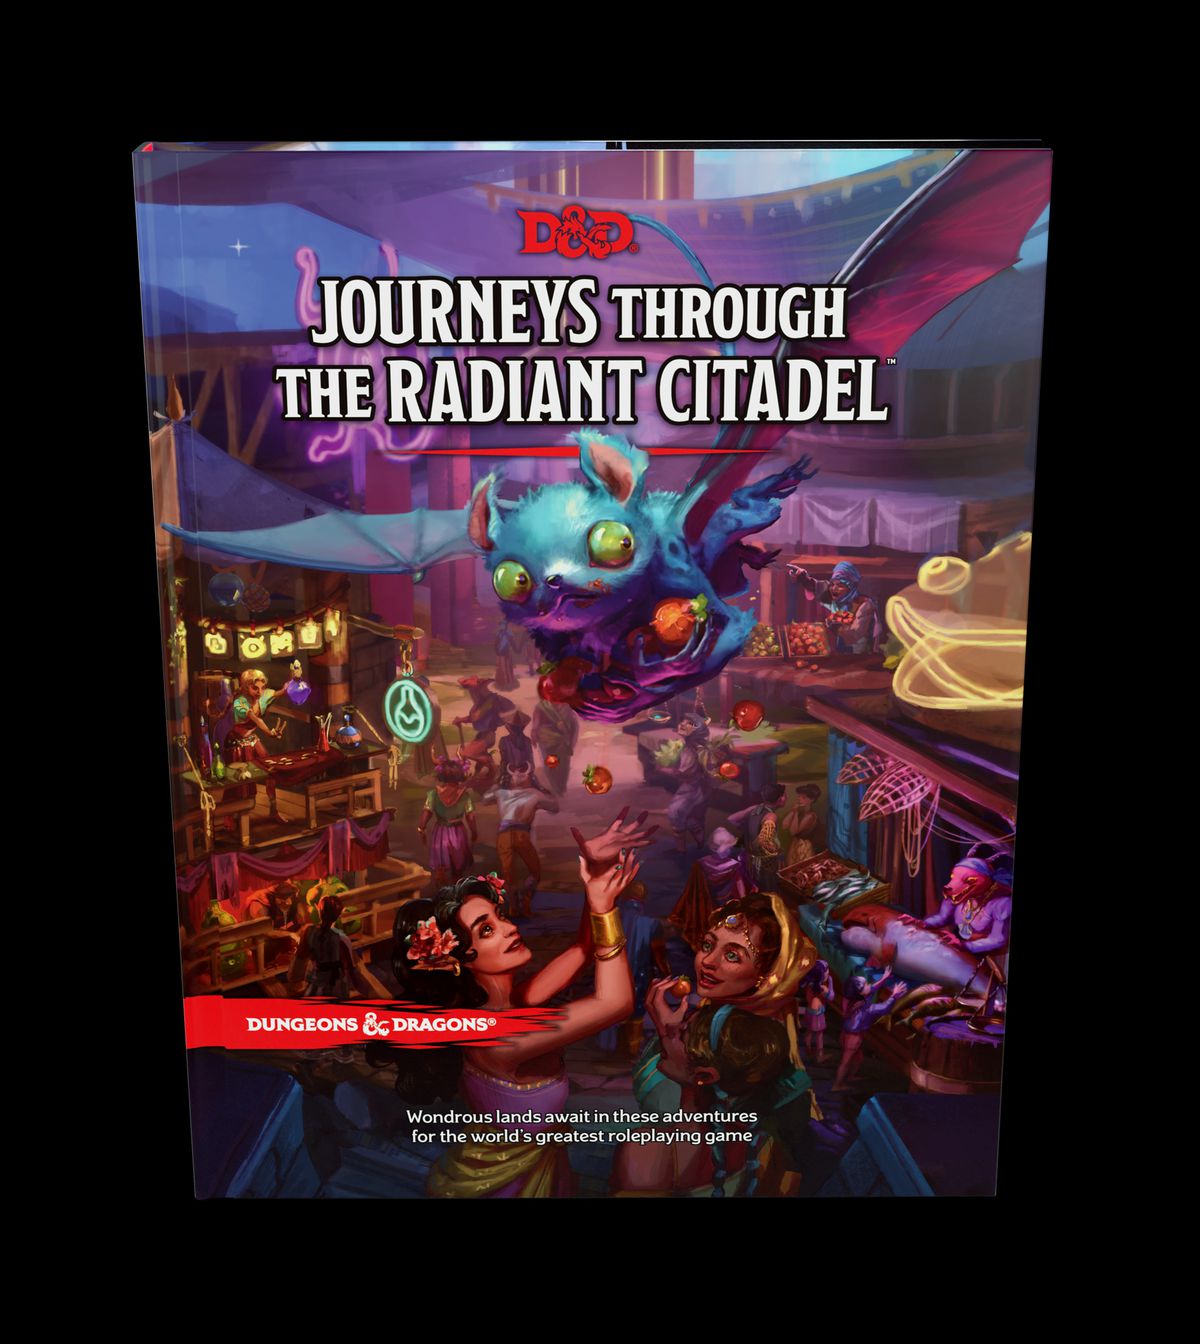 A mock-up of the standard cover of Journeys Through the Radiant Citadel